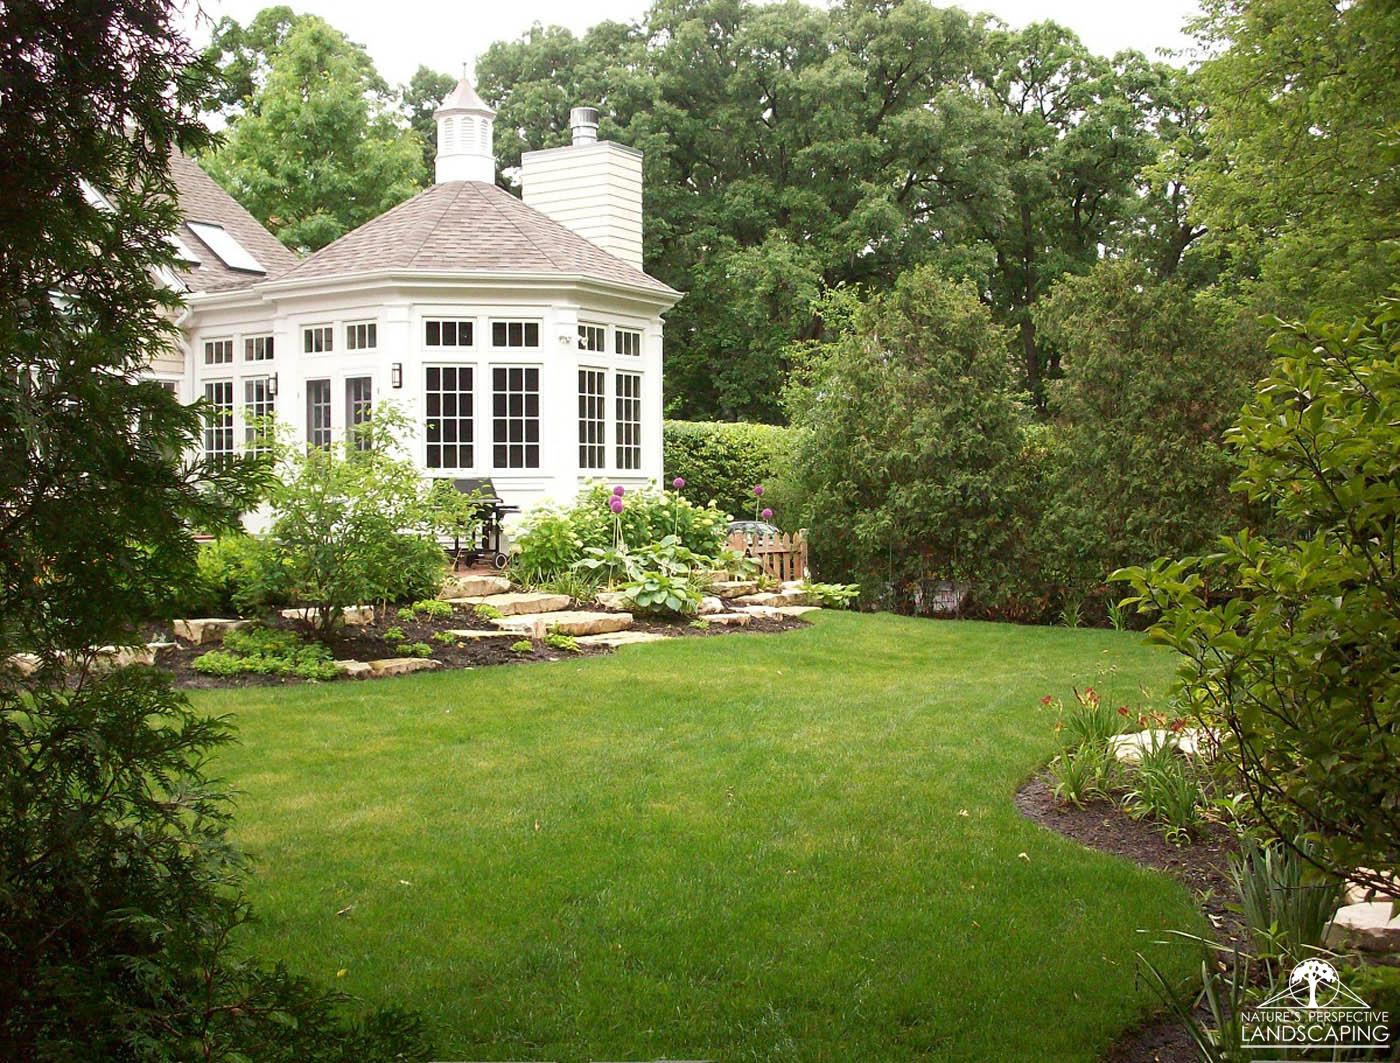 outcroppings and backyard plantings - Nature's Perspective Landscaping